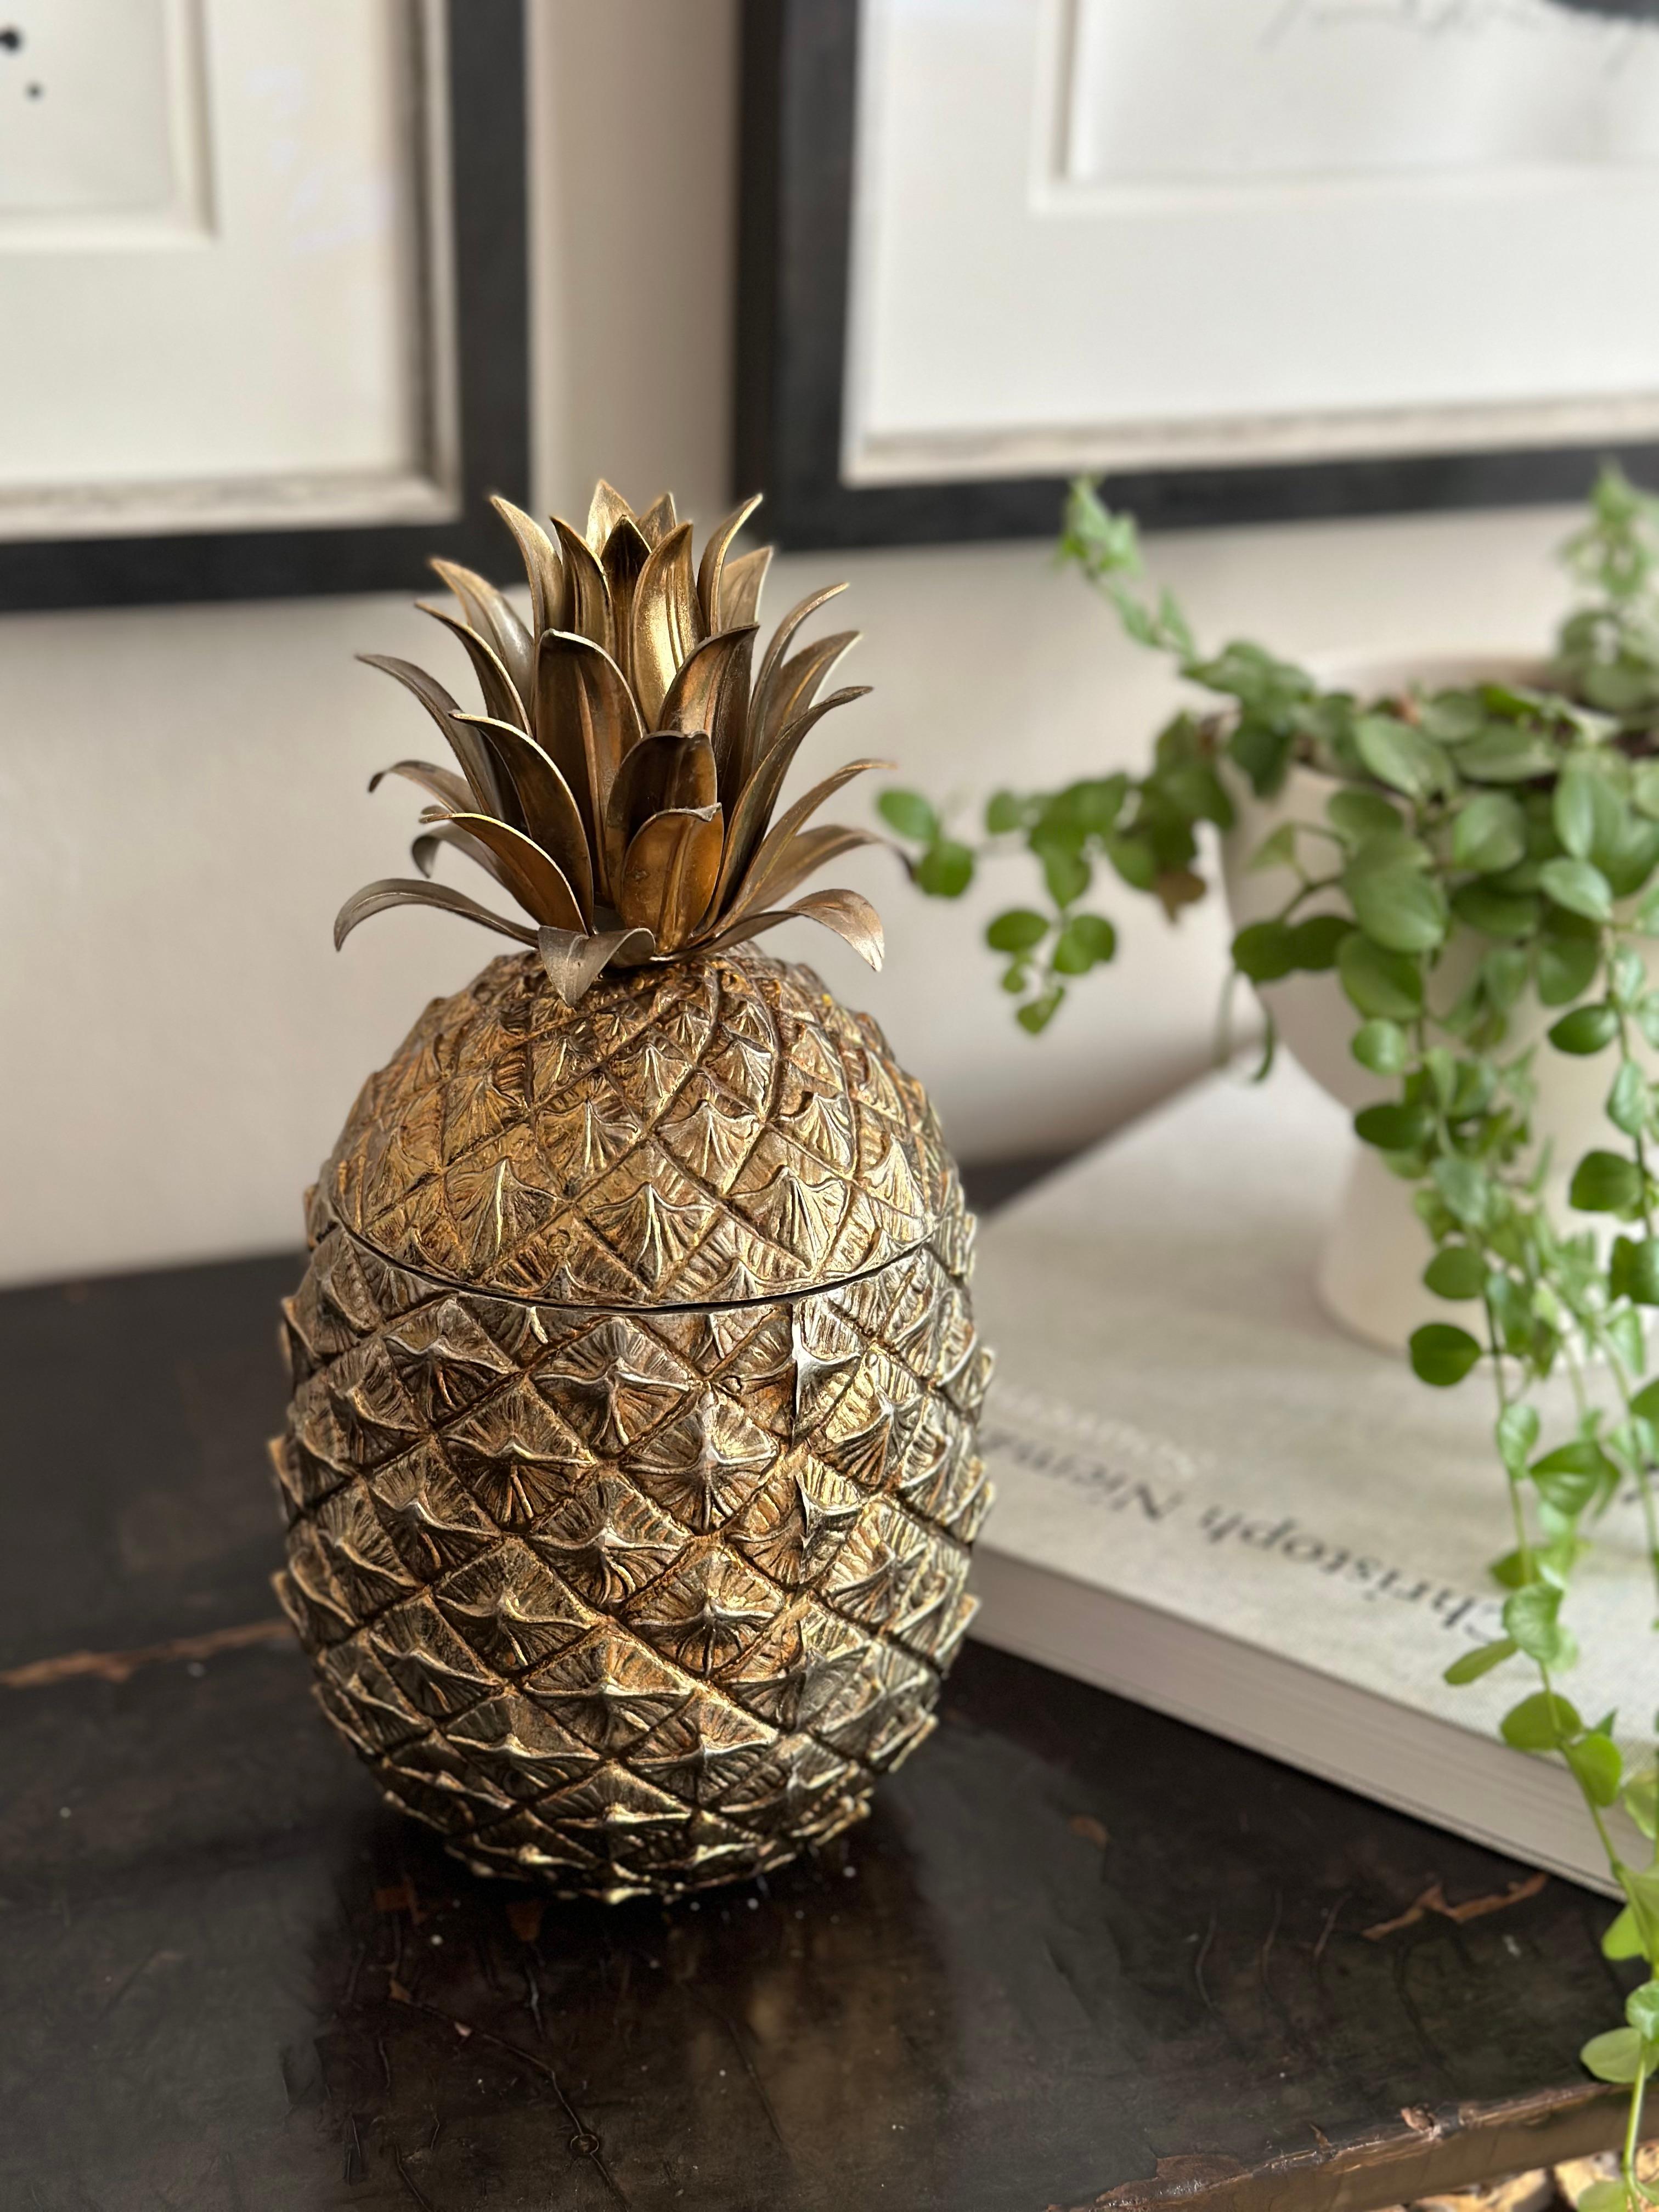  Golden Mauro Manetti Pineapple Ice Bucket from Florence, Italy, circa 1970 For Sale 7